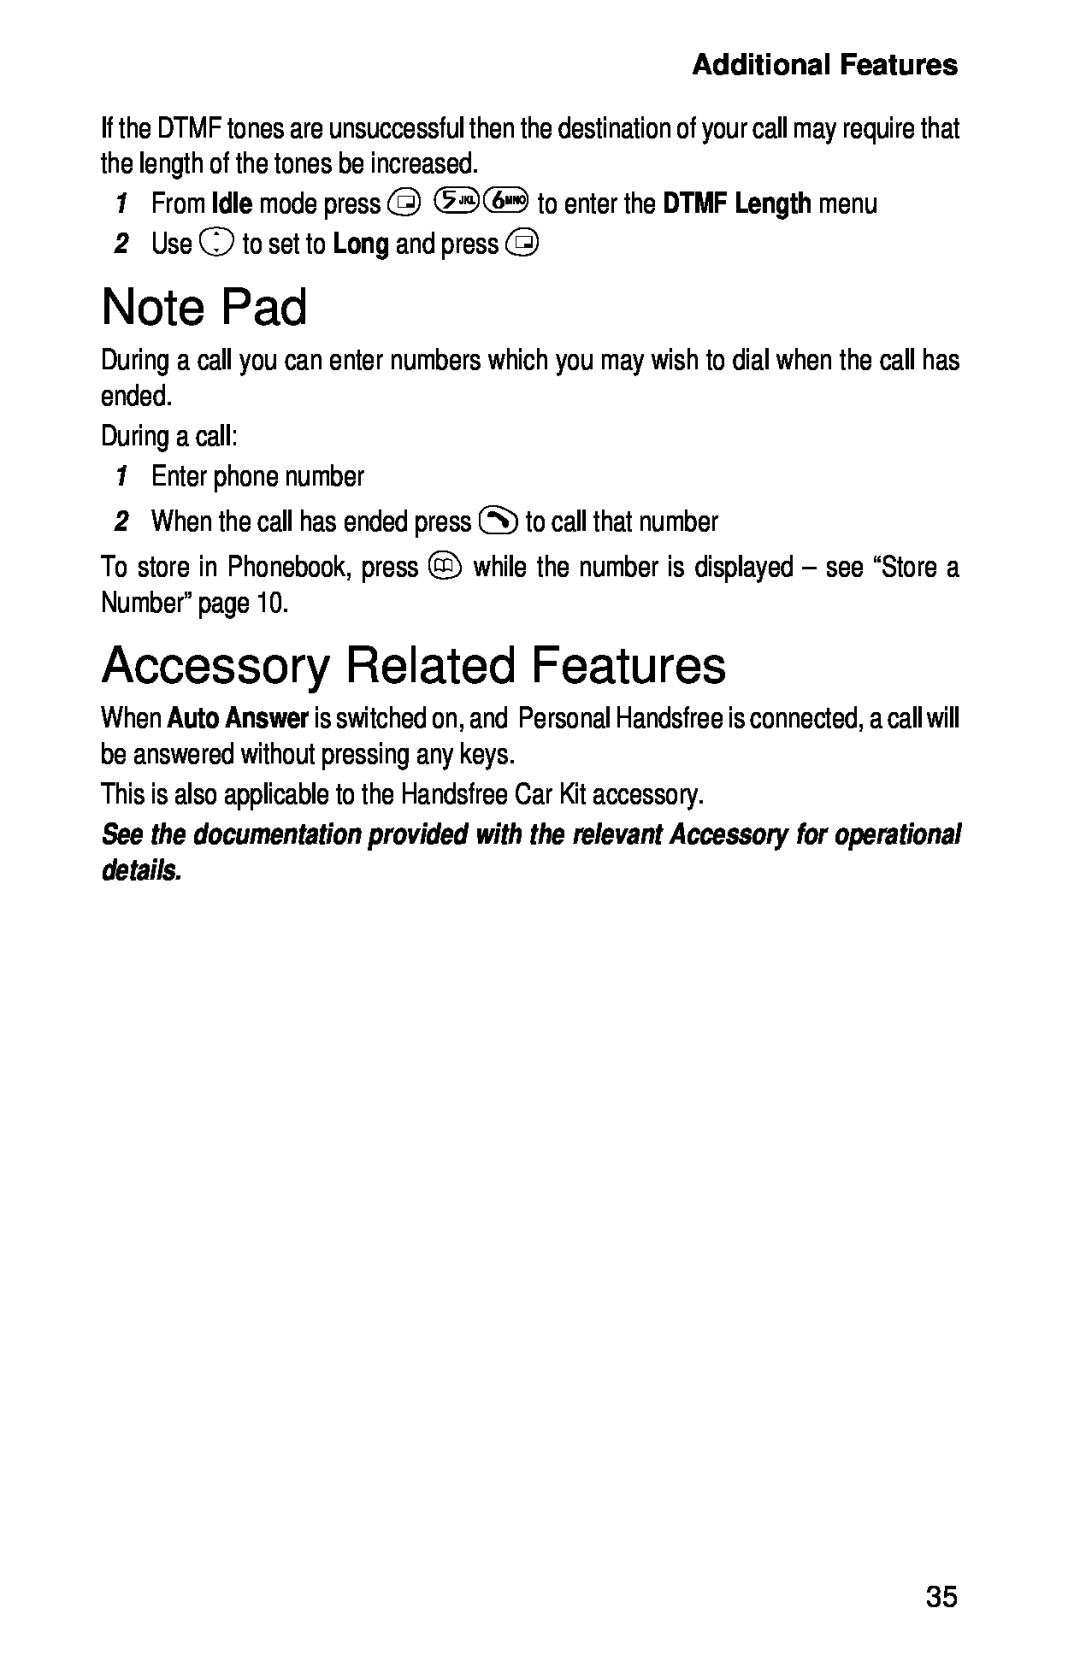 Panasonic EB-GD52 operating instructions Note Pad, Accessory Related Features, Additional Features 